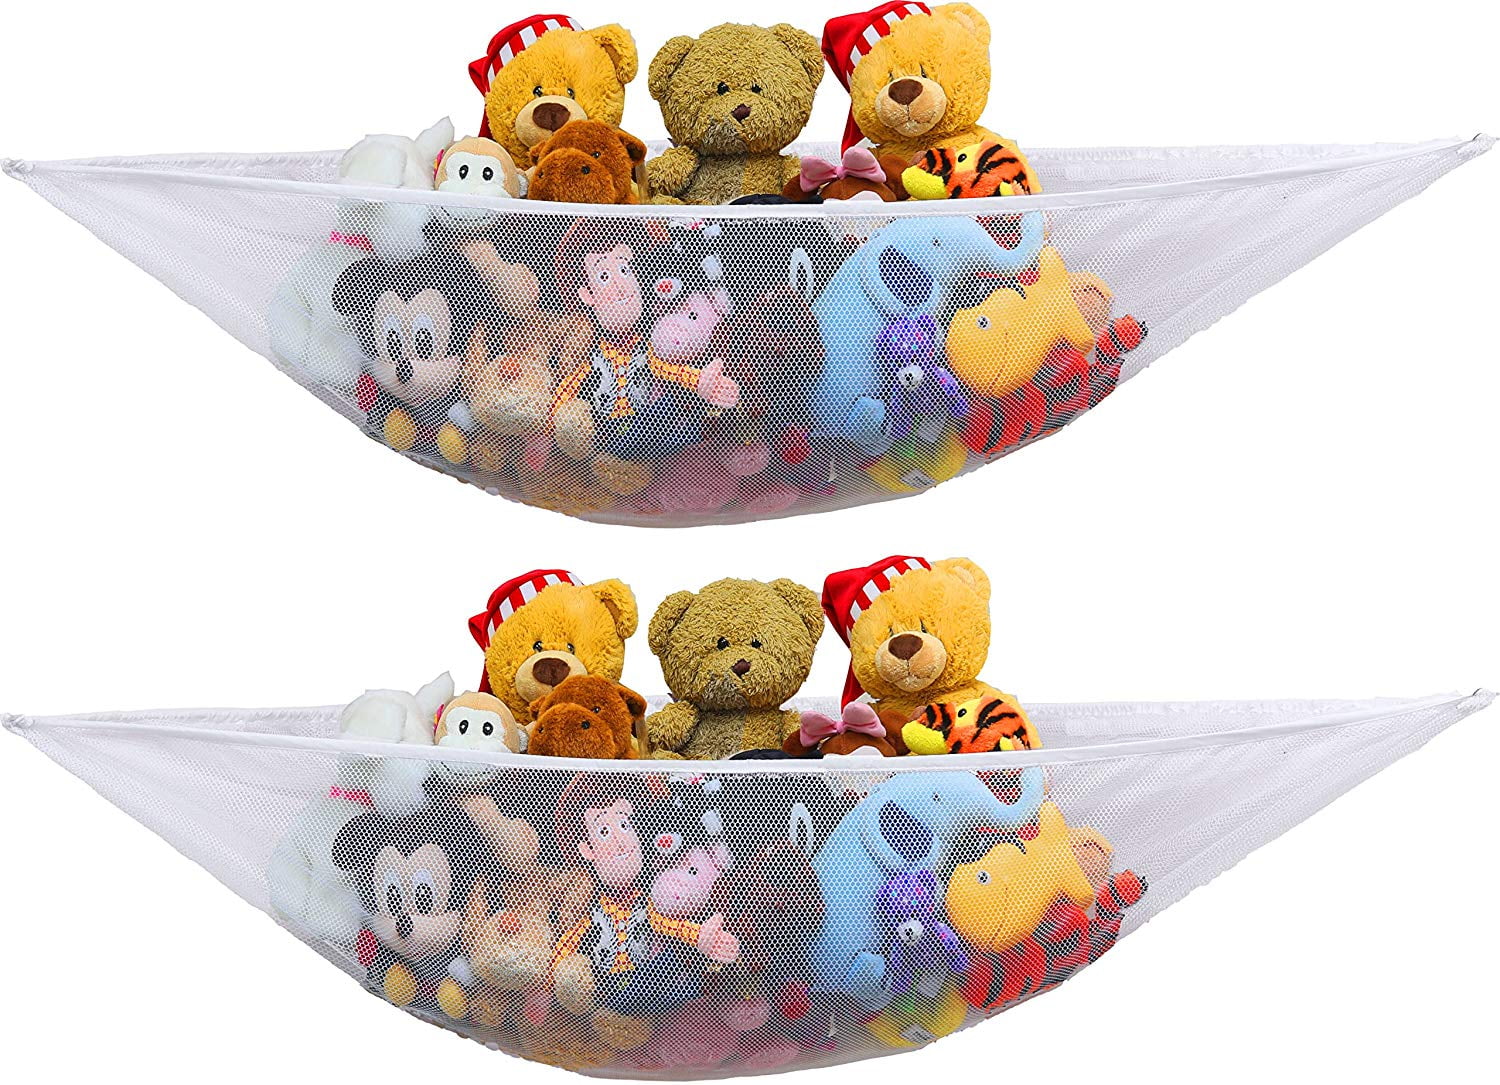 2PACK- Organize stuffed animals or children's toys with this mesh hammock.  Looks great with any dcor while neatly organizing kids toys and stuffed